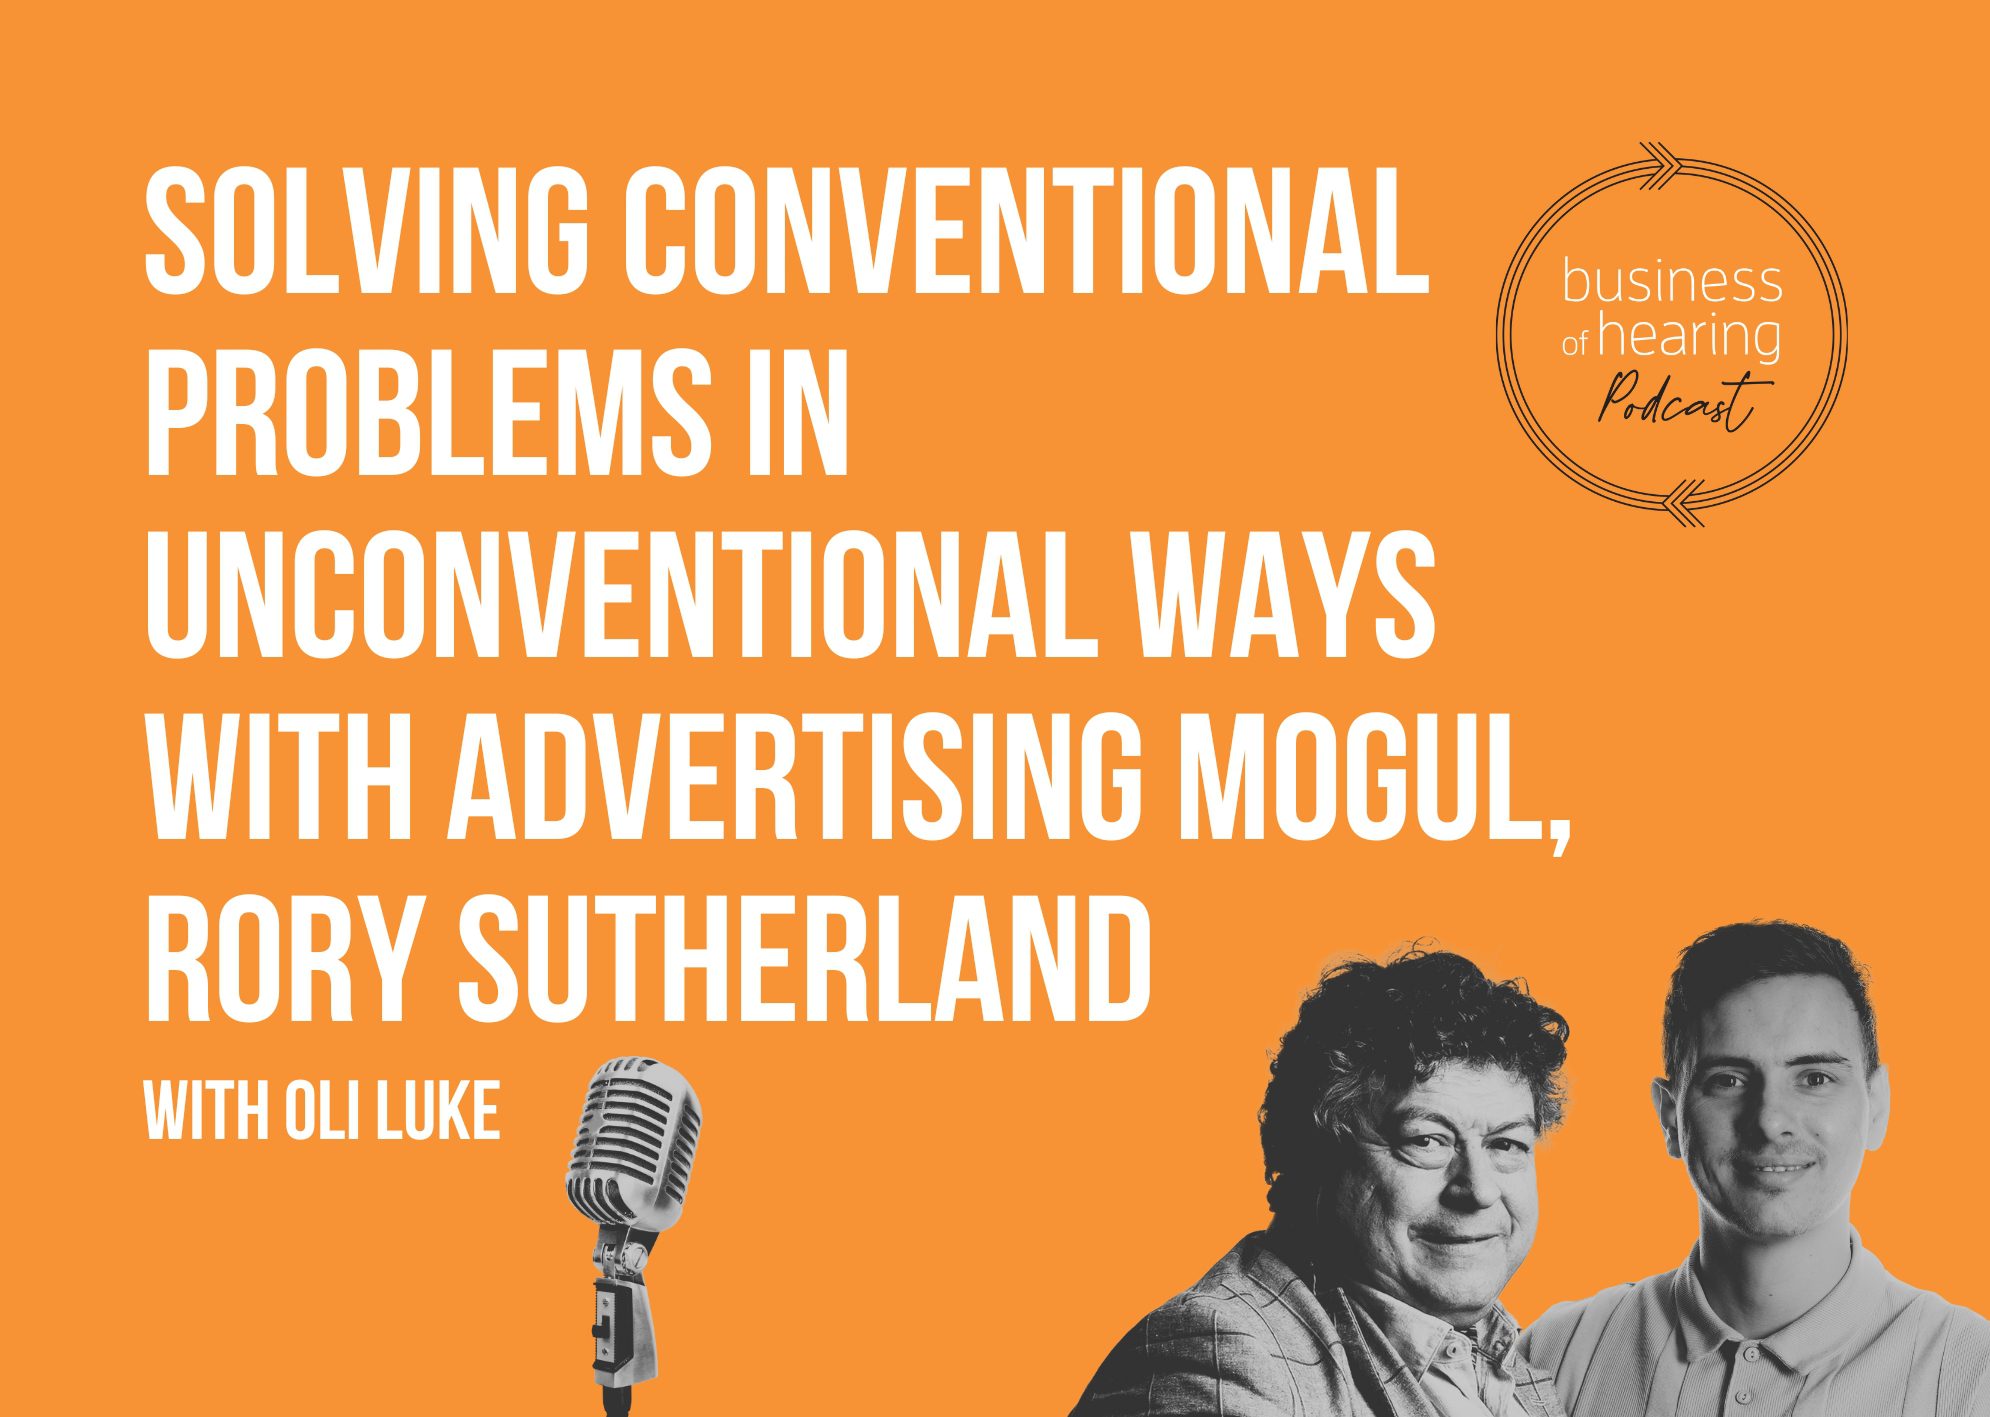 solving conventional problems in unconventional ways with advertising mogul, Rory Sutherland podcast image